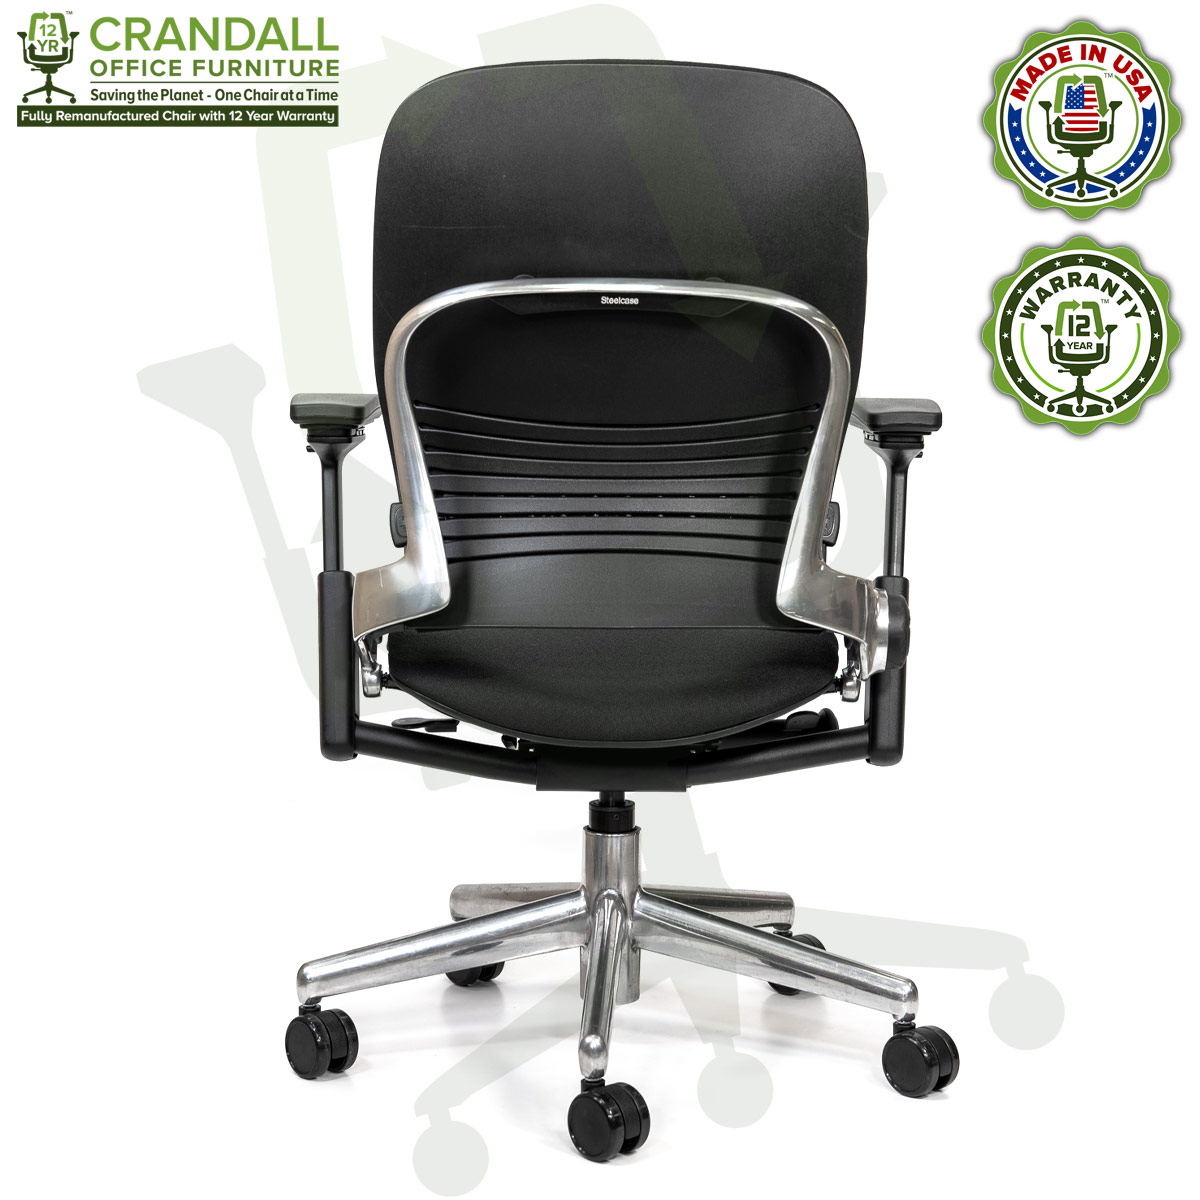 Crandall Office Furniture Remanufactured Steelcase V2 Leap Chair - Polished Aluminum Frame 05